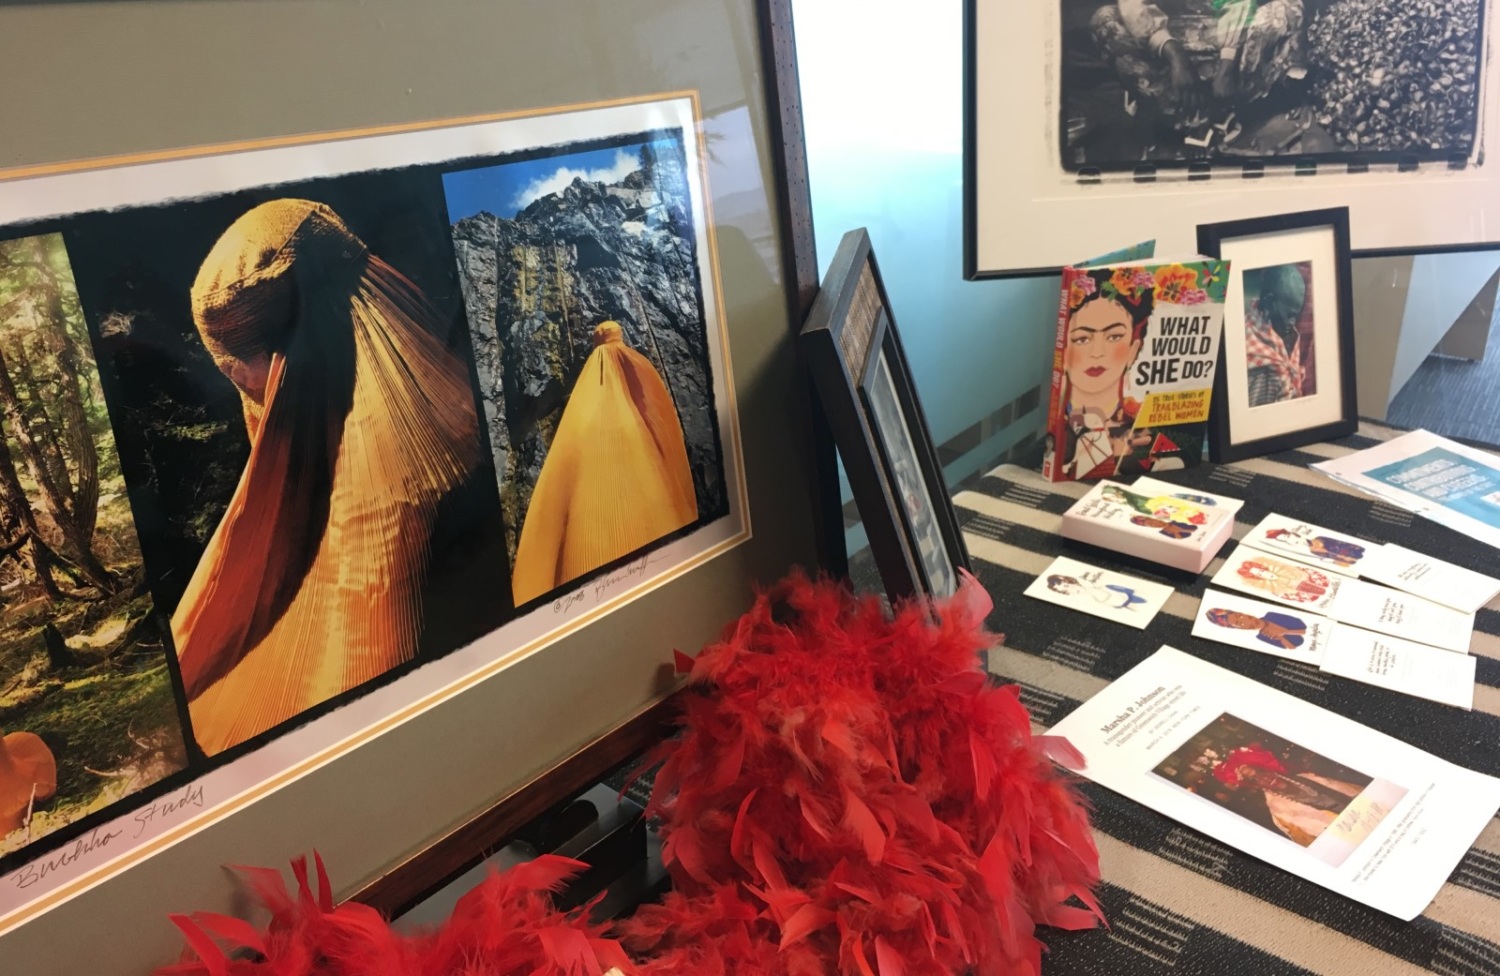 a table with books, a painting, a red feather boa